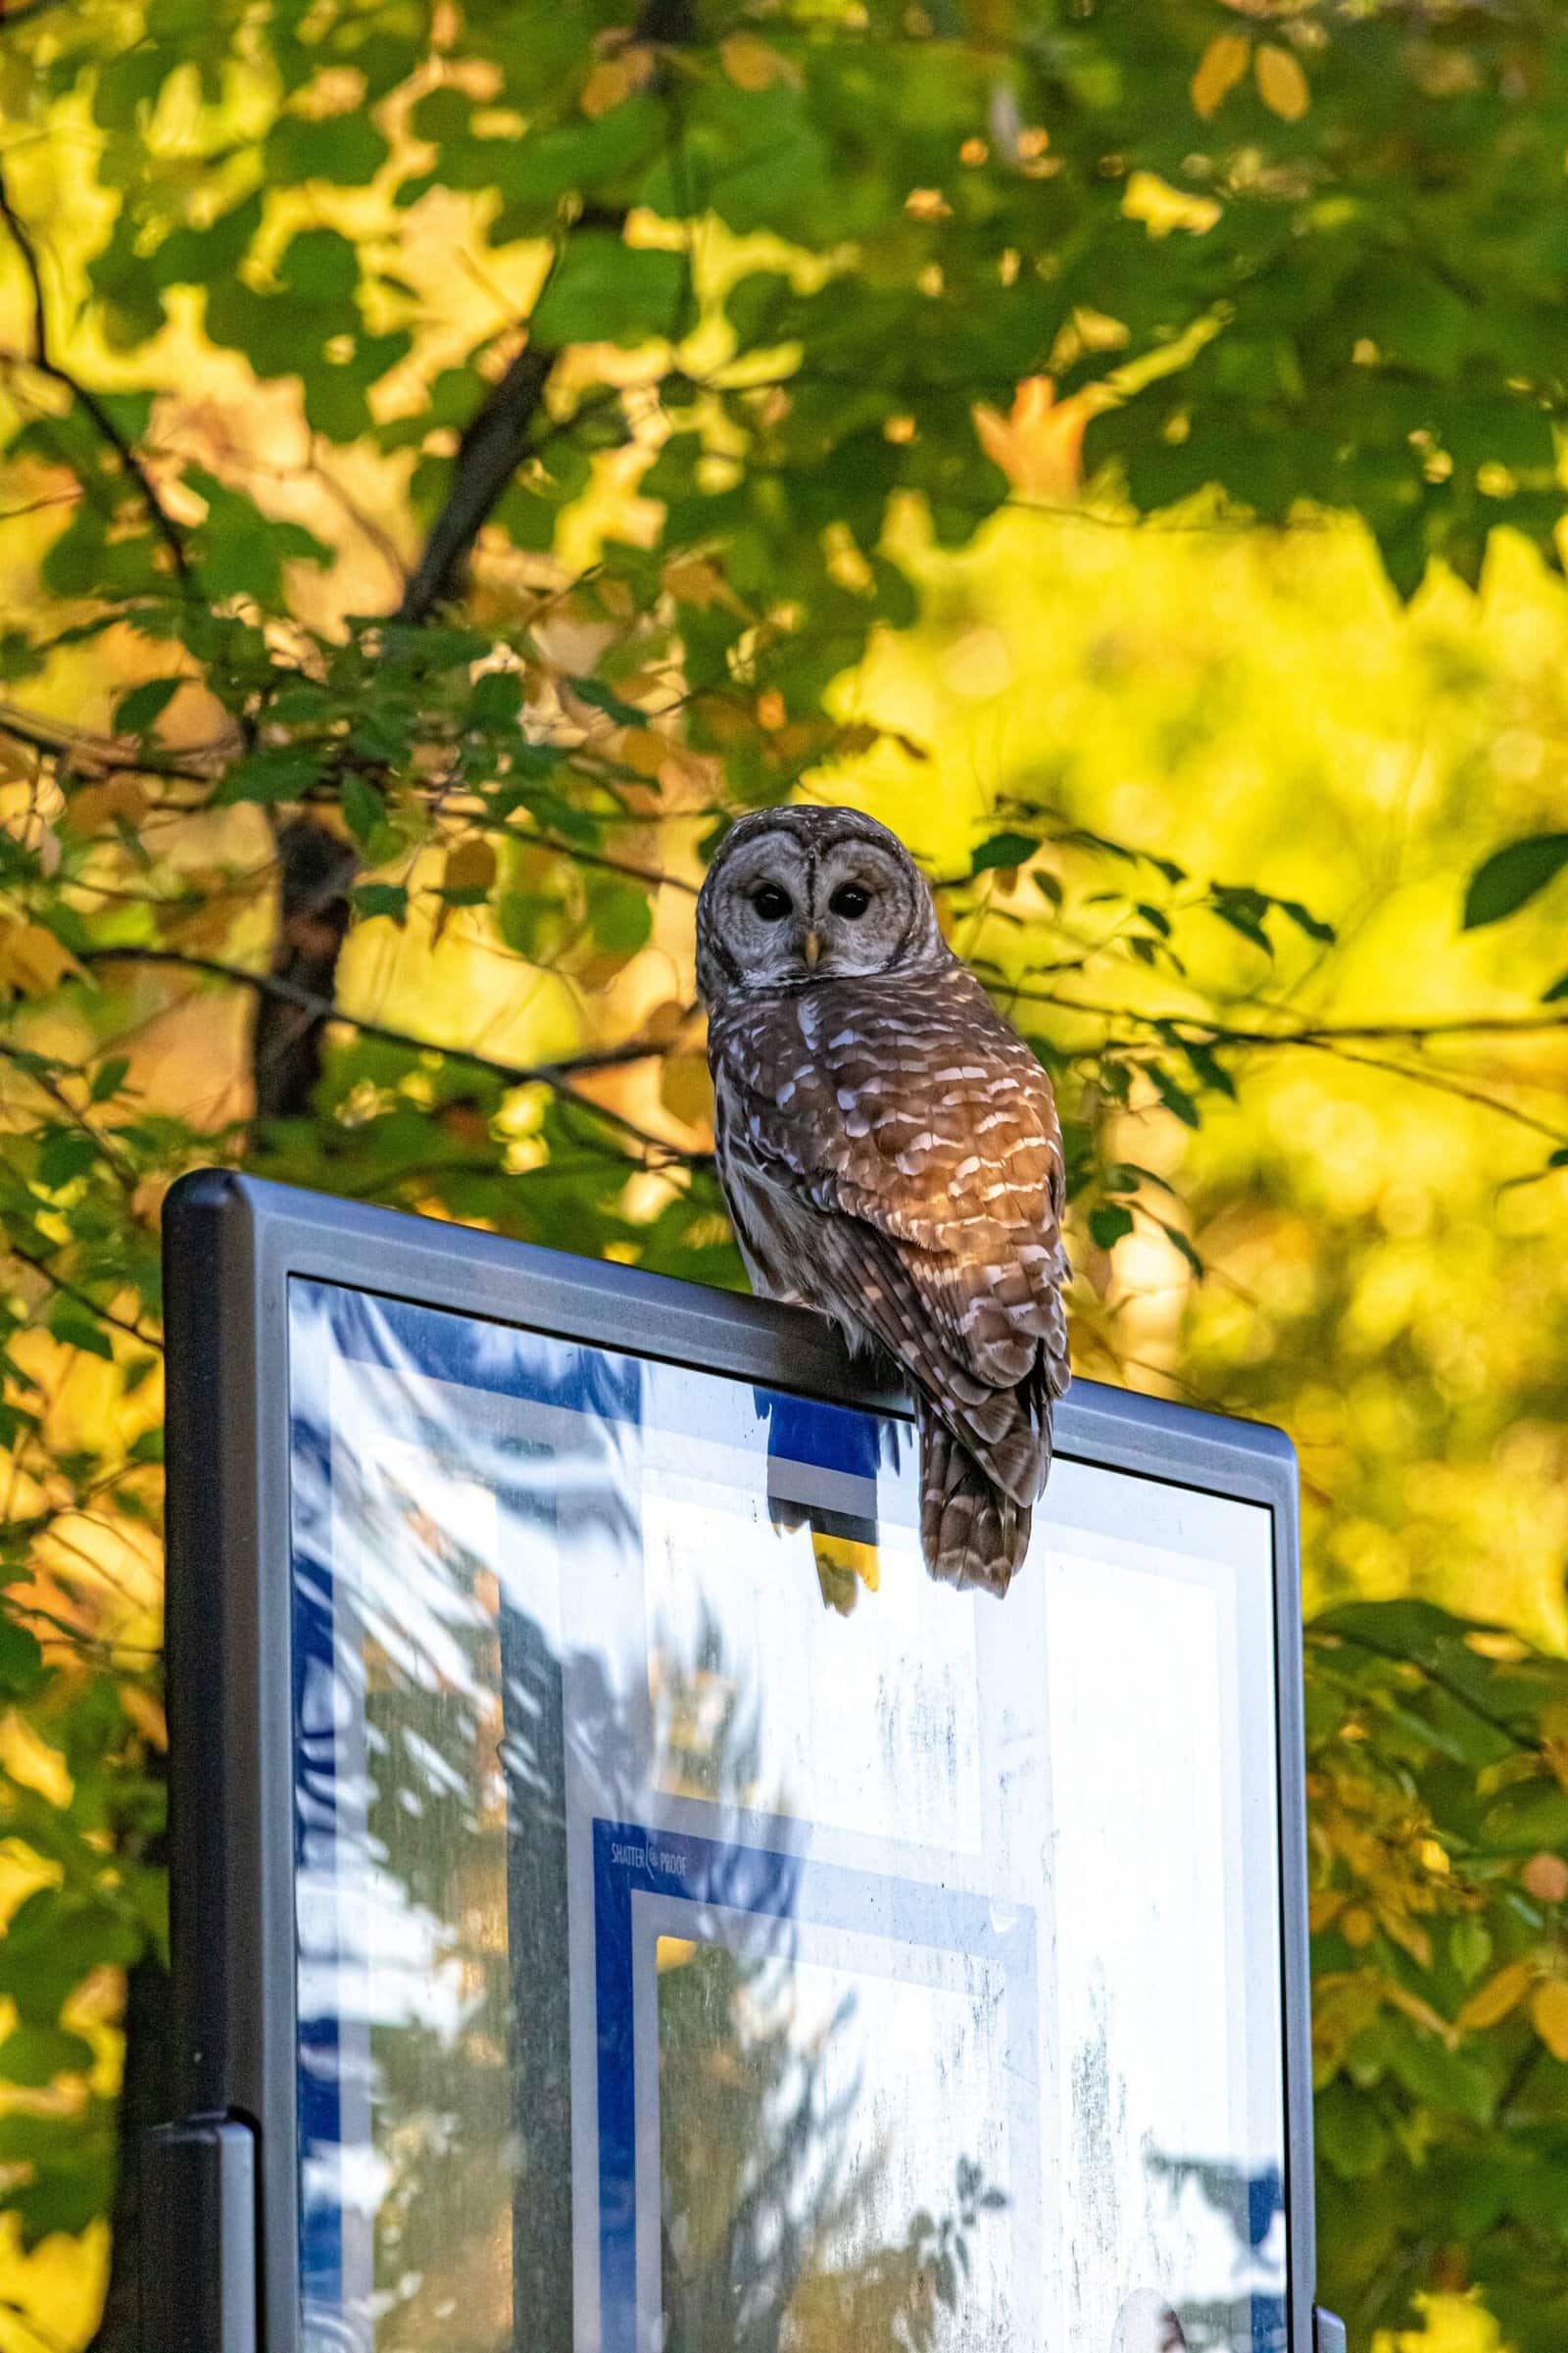 PHOTOS: Owl spotted in Northborough